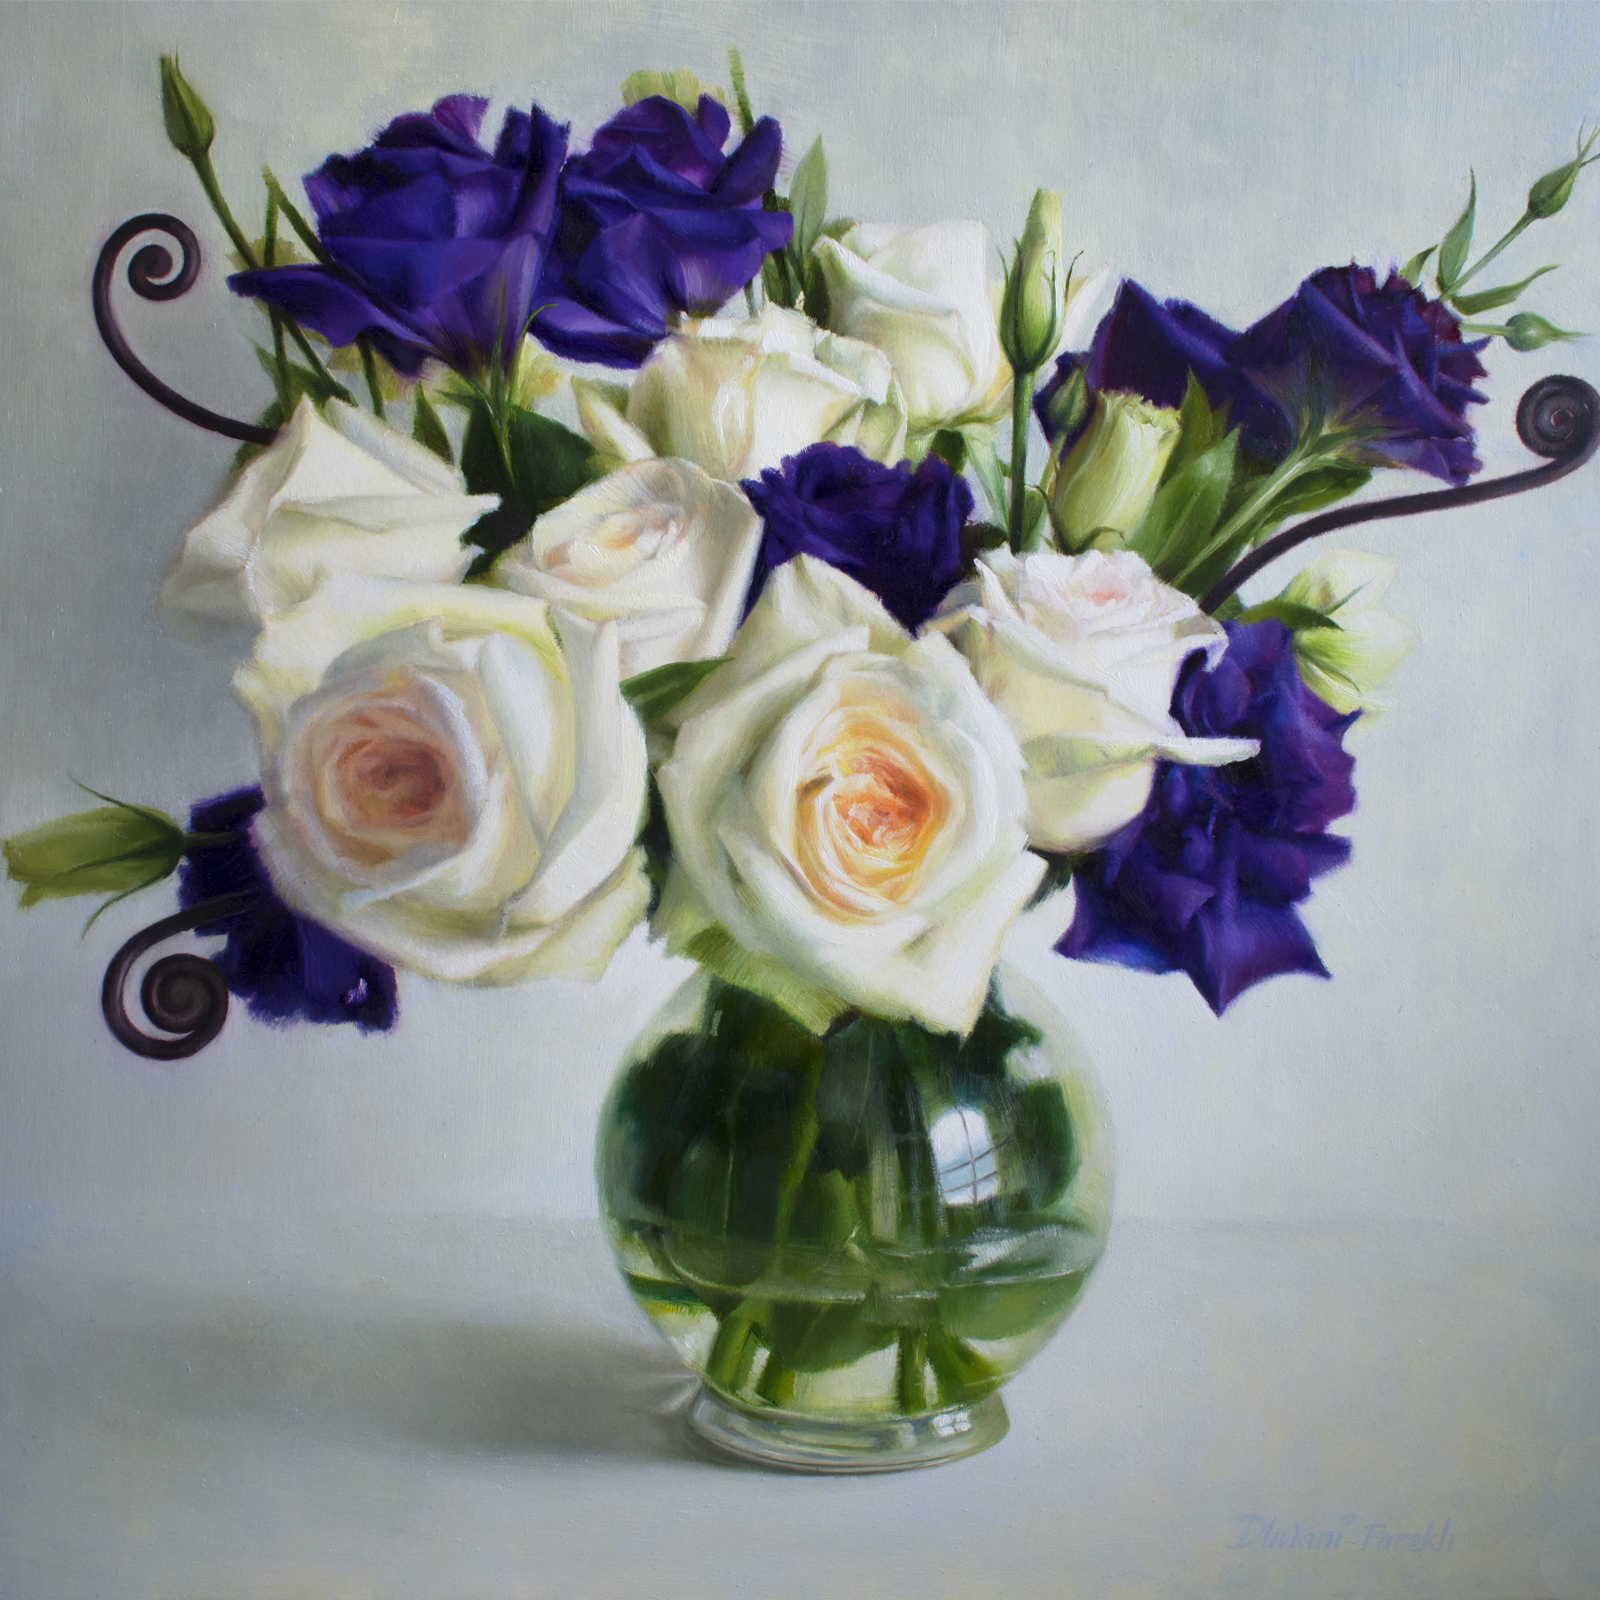  Roses, Lisianthus and Fern Shoots  16 x 16  Oil on Panel 